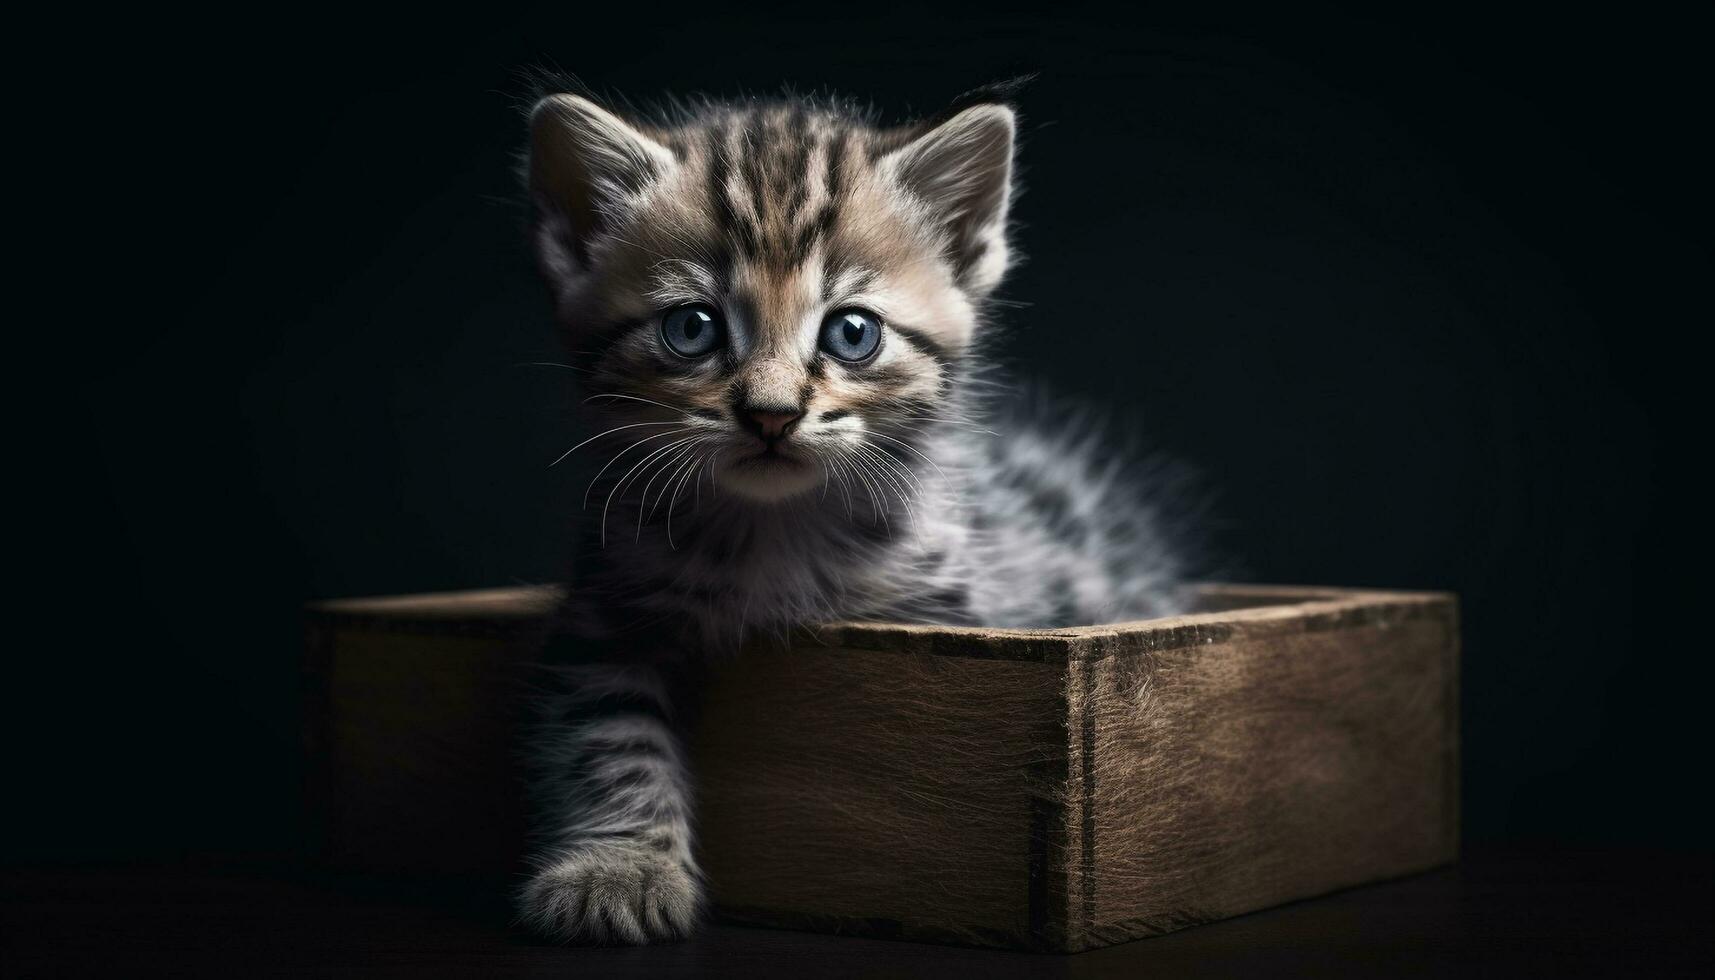 Cute kitten with striped fur, sitting and staring with curiosity generated by AI photo